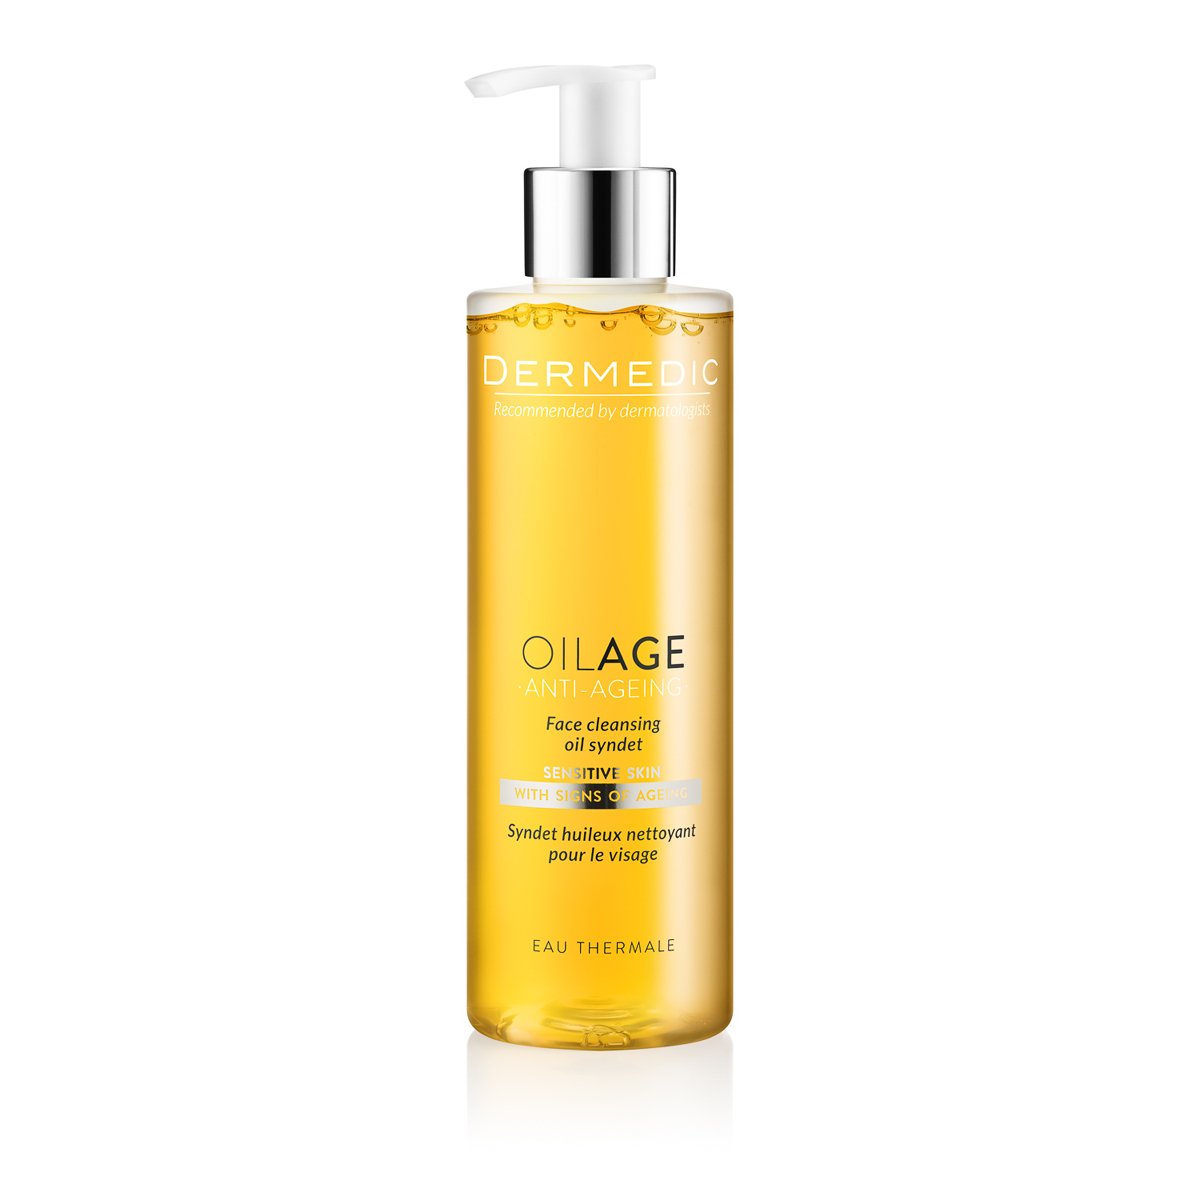 Face cleansing oil syndet